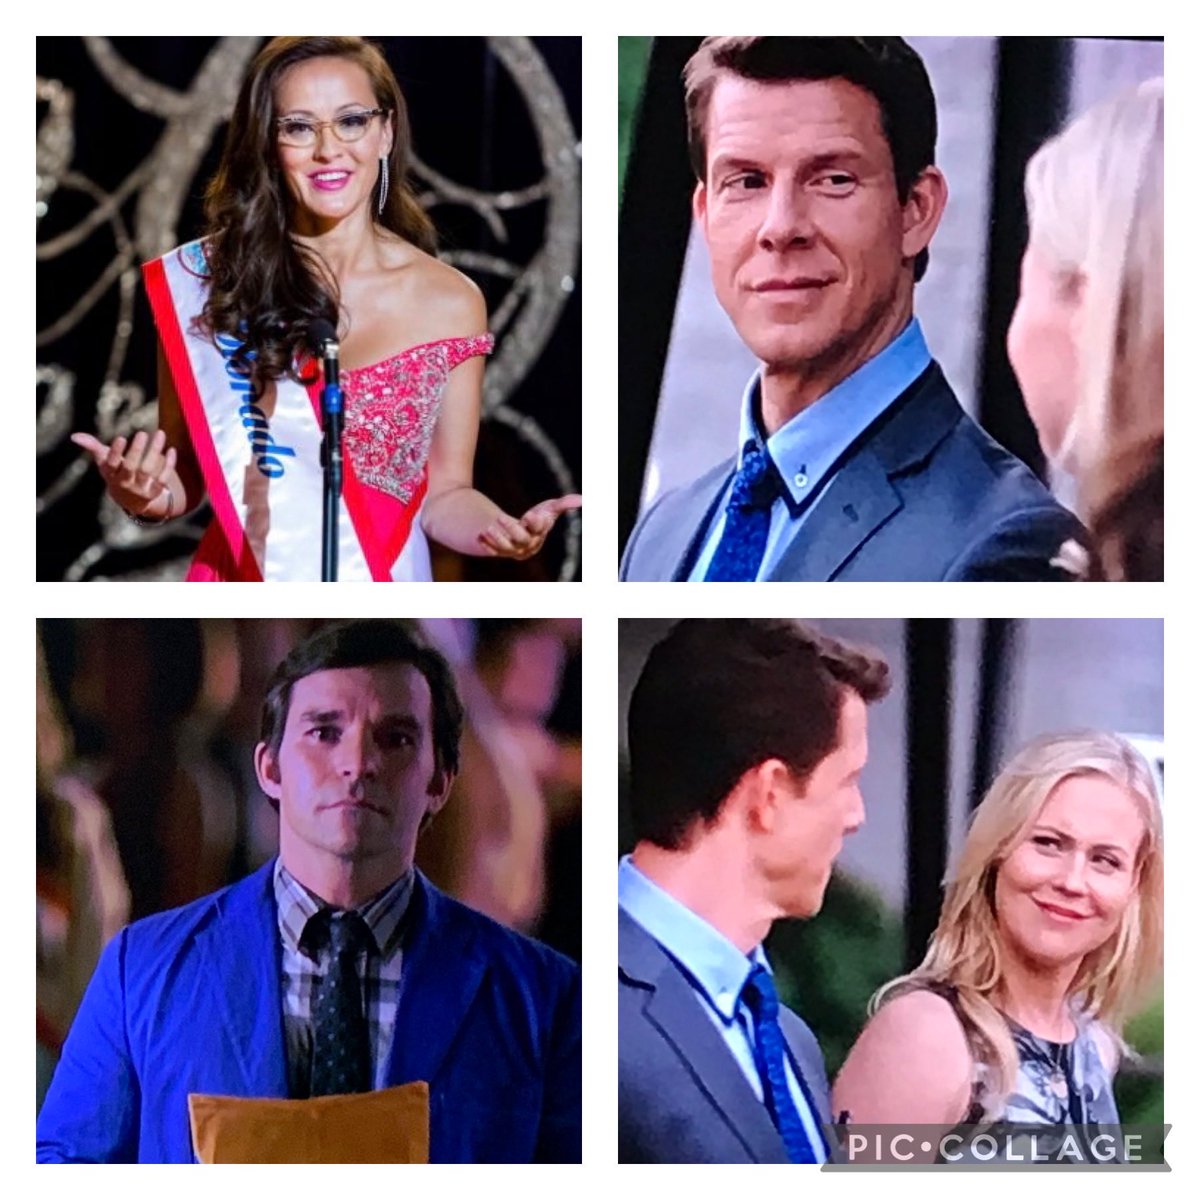 #POstables #TheImpossibleDream You just can’t get any cuter than these four characters. We can’t wait to see them back on our screens again in #SSD12 and #SSD13! ⁦@MarthaMoonWater⁩ ⁦@kristintbooth⁩ ⁦@Eric_Mabius⁩ ⁦@RealCrystalLowe⁩ ⁦@geoffgustafson⁩